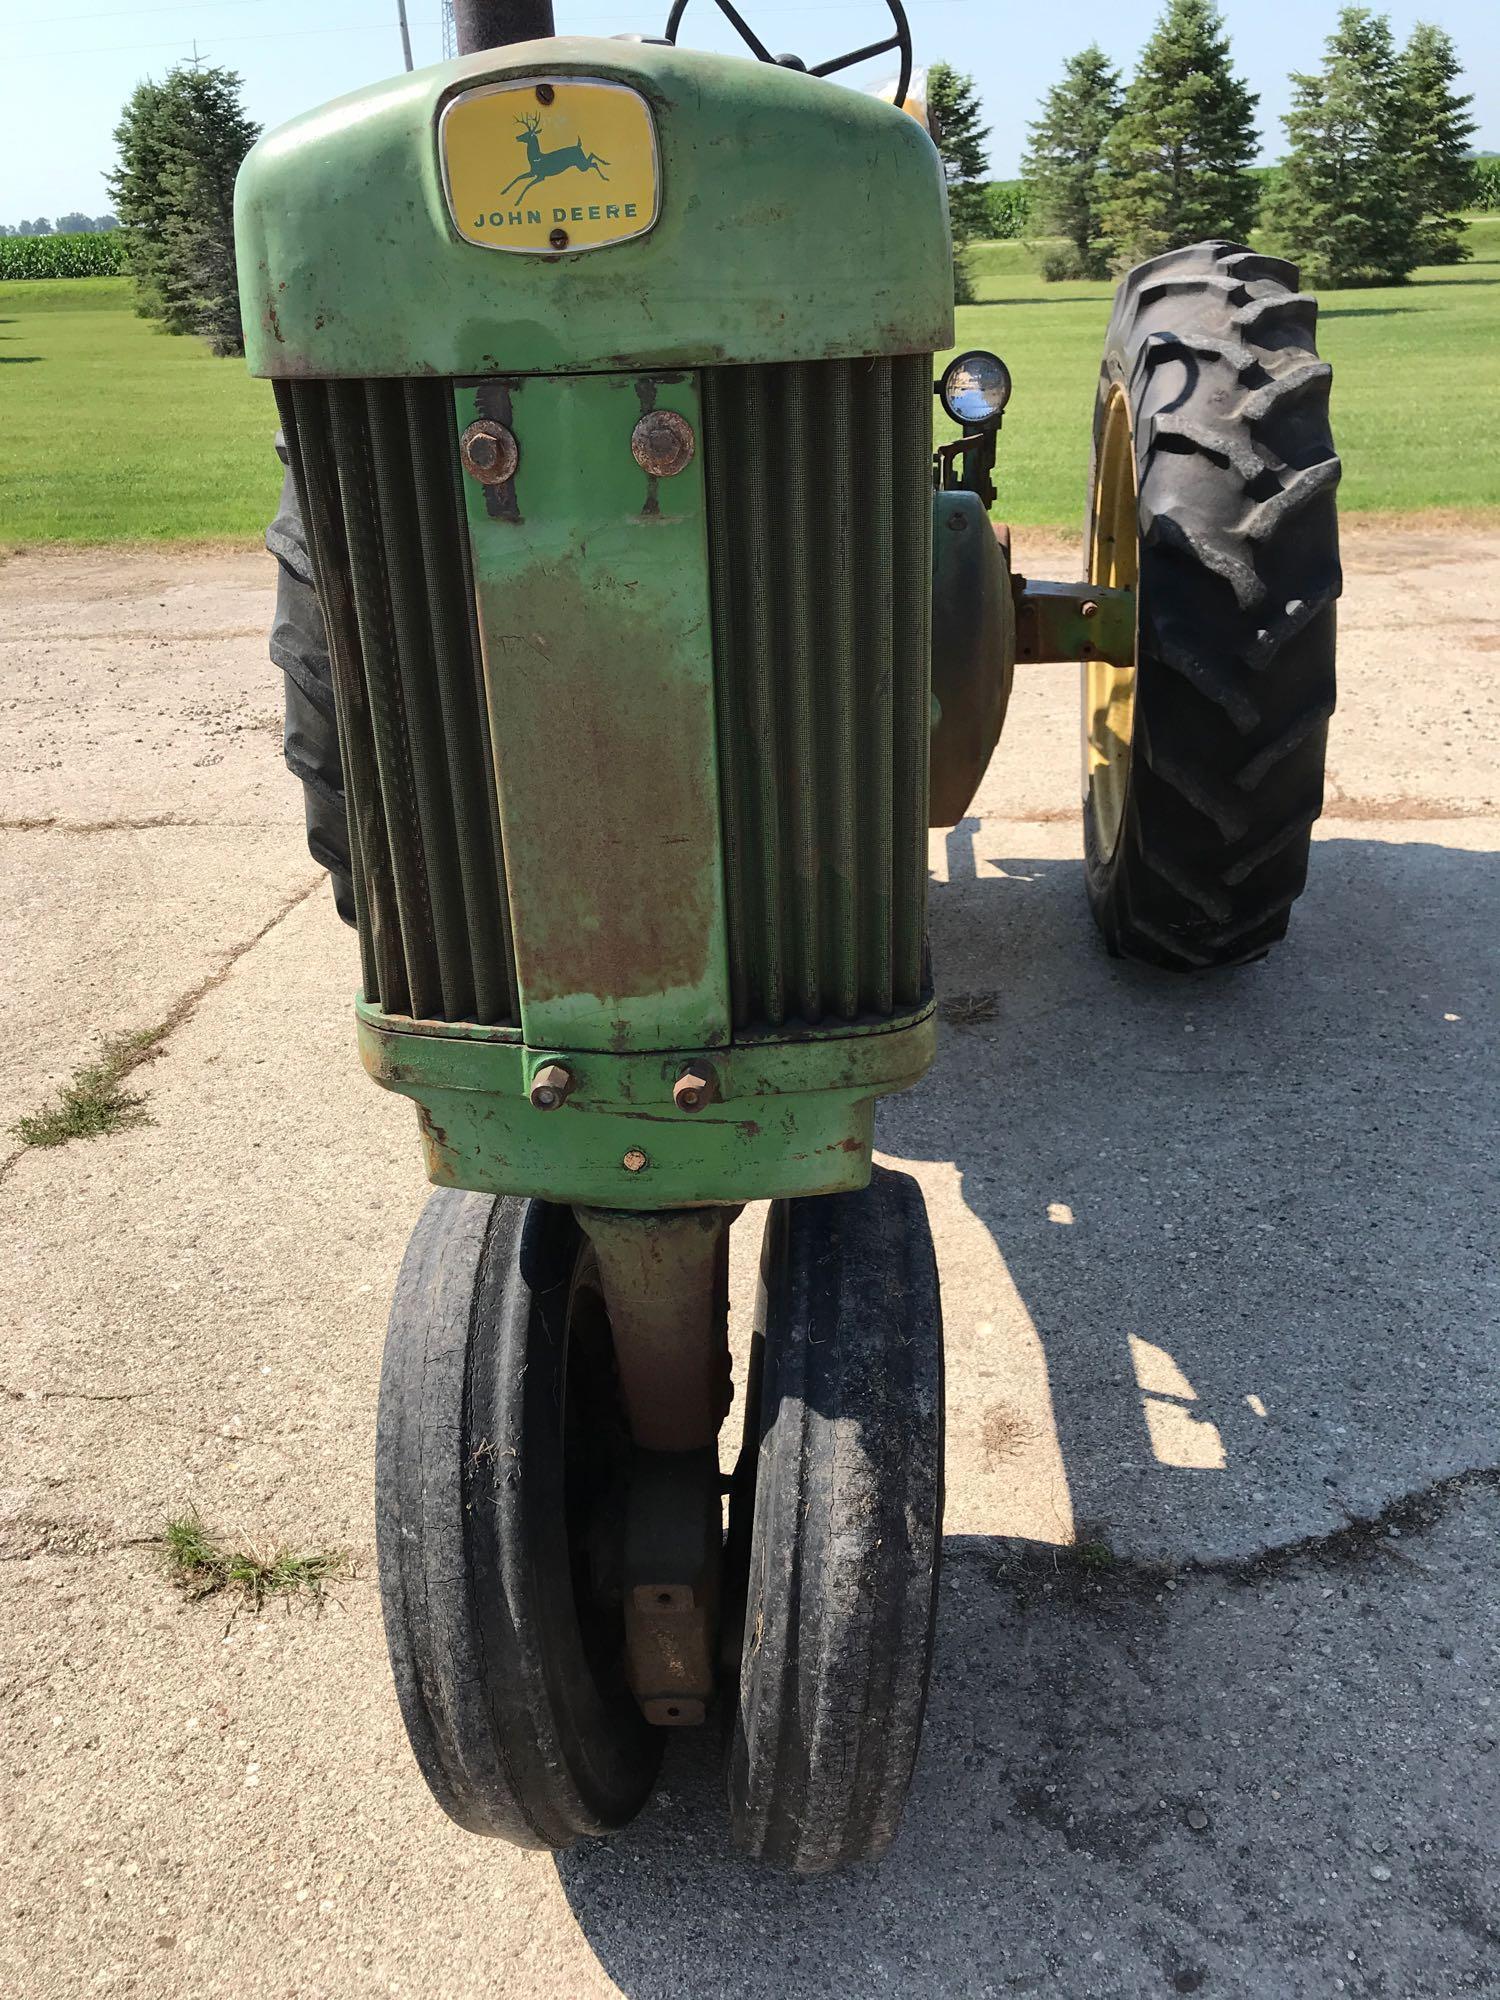 1960 JD 630 Tractor